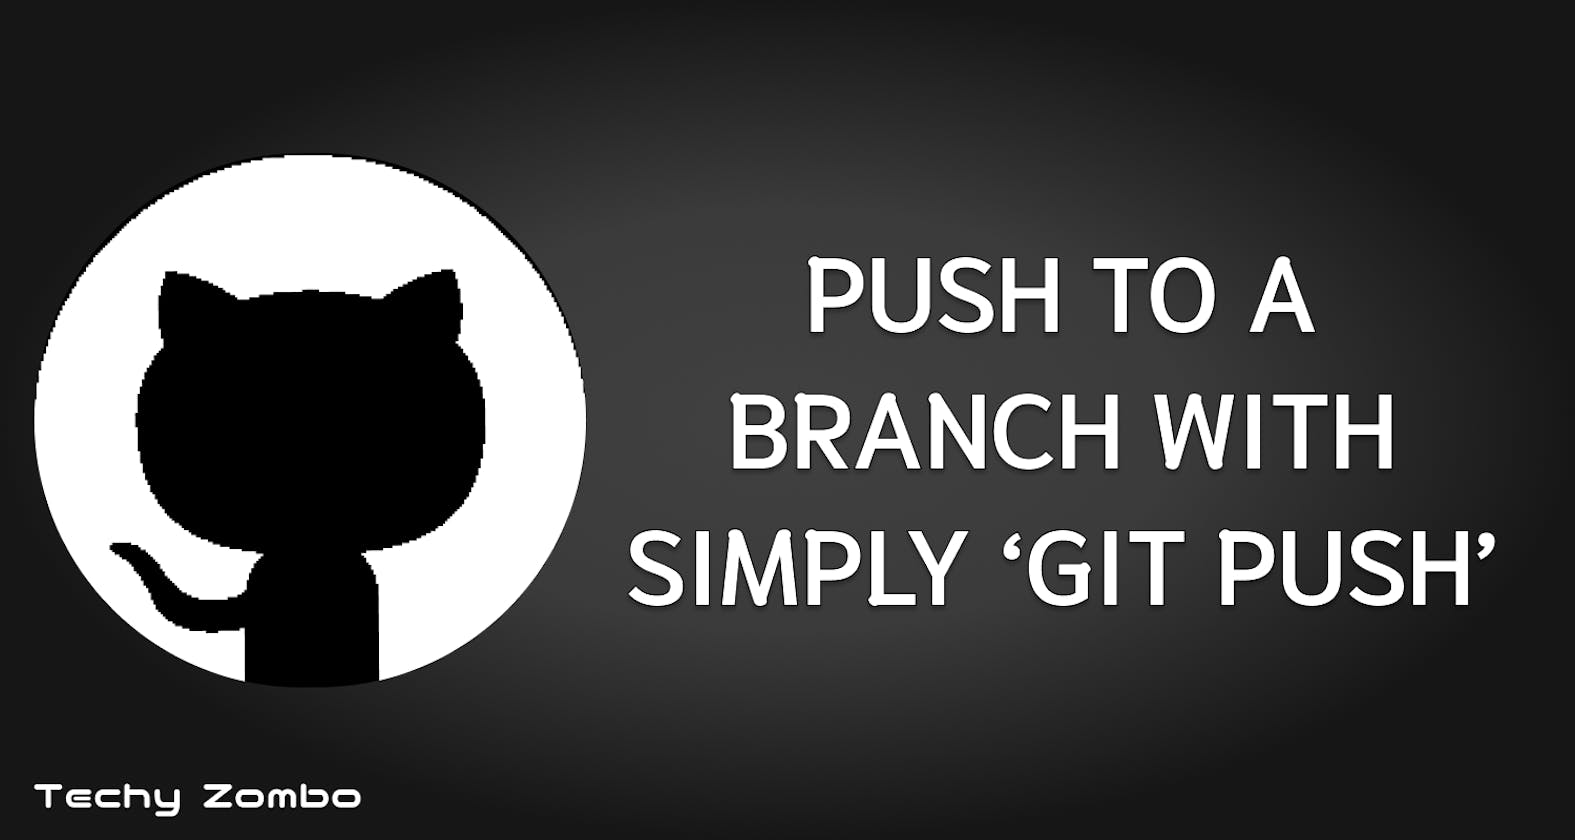 How To Push To a Branch with Simply "git push"